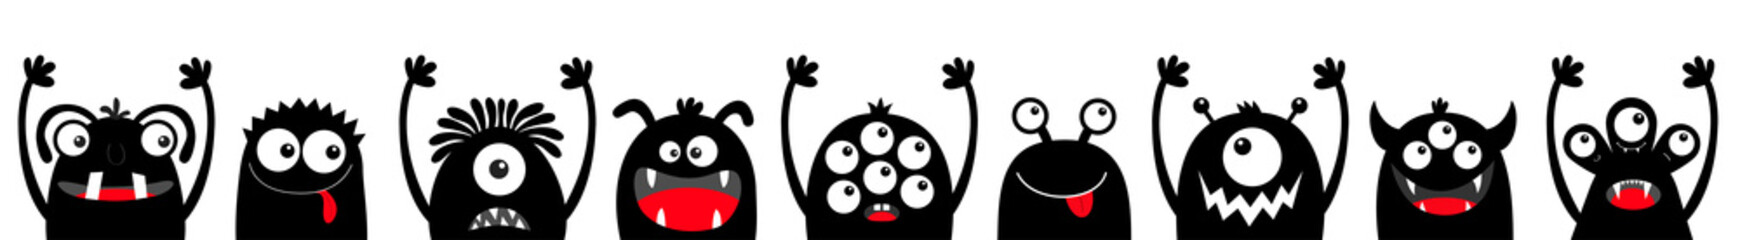 Monster black silhouette head face icon set line. Happy Halloween. Eyes, tongue, tooth fang, hands up. Cute cartoon kawaii scary funny baby character. White background. Flat design.